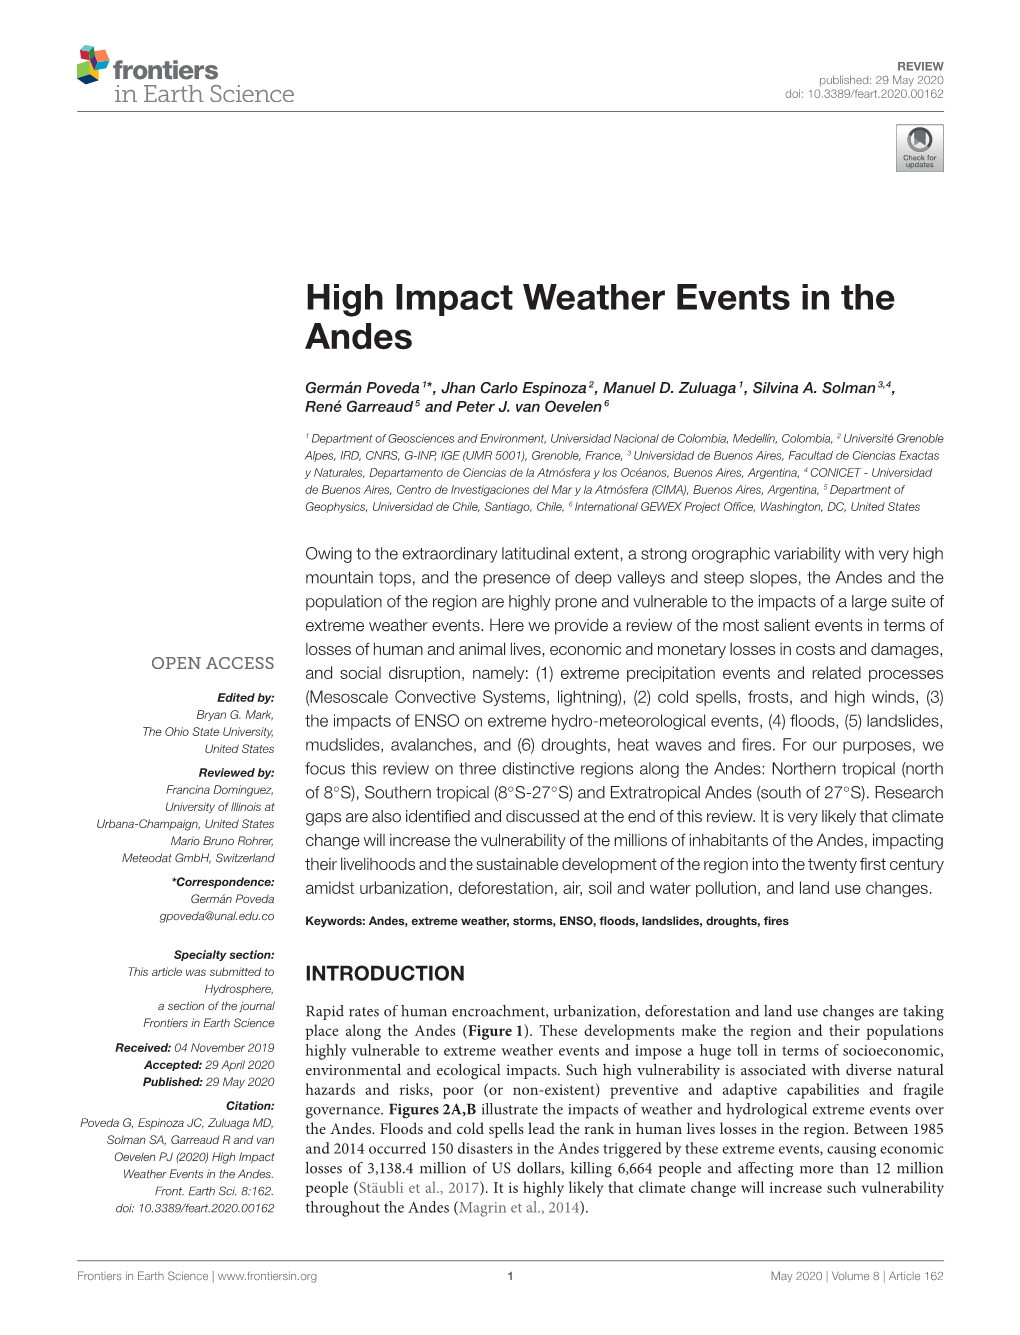 High Impact Weather Events in the Andes